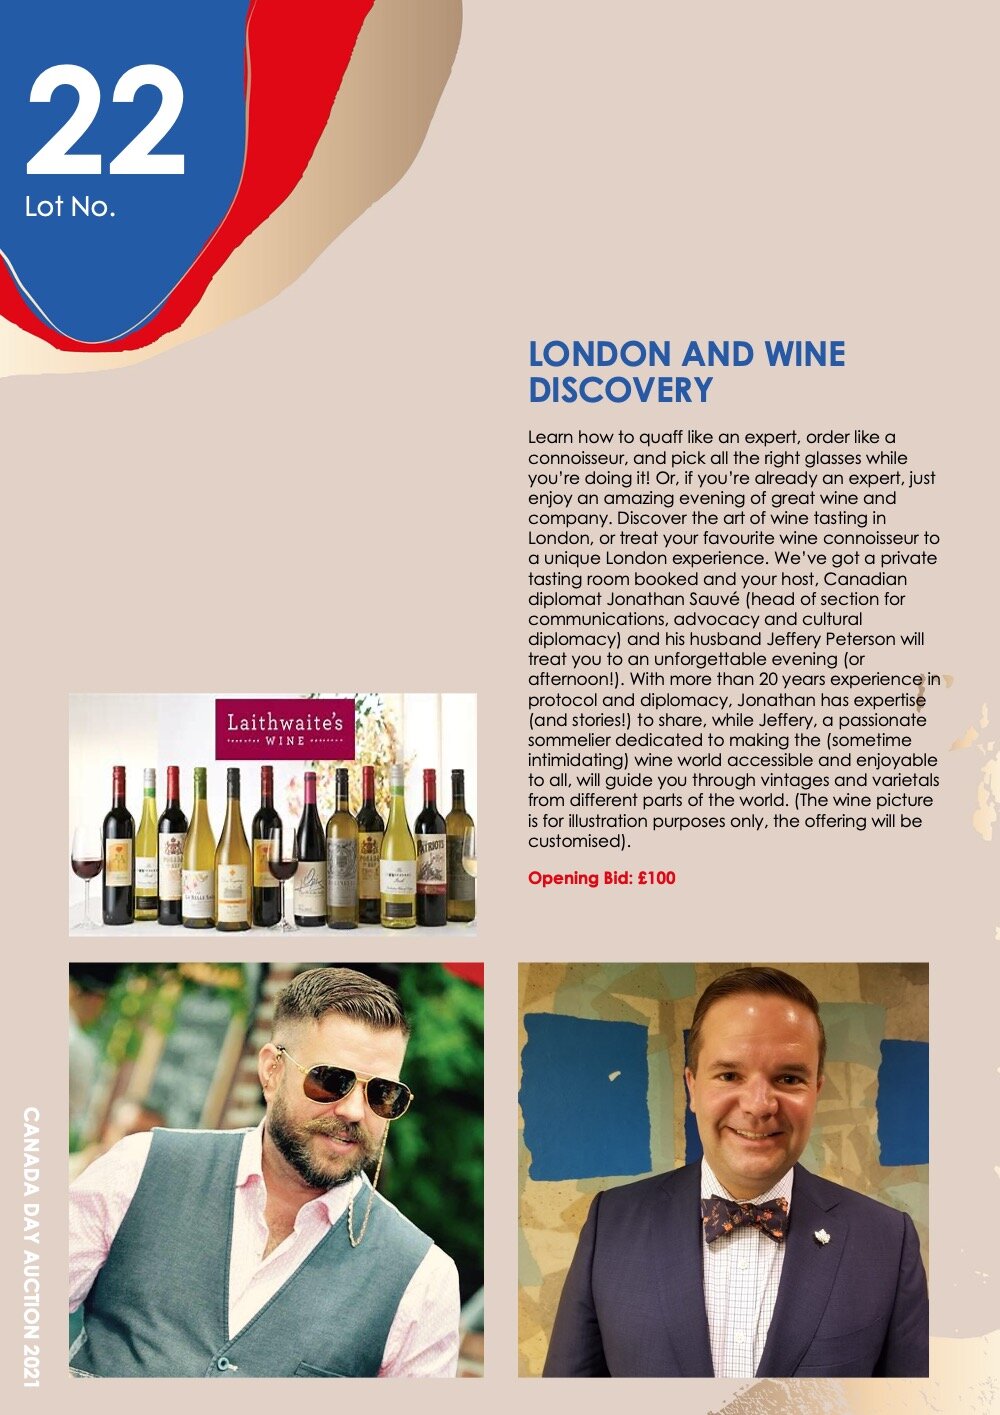   Lot 22: LONDON AND WINE DISCOVERY    Learn how to quaff like an expert, order like a connoisseur, and pick all the right glasses while you’re doing it! Or, if you’re already an expert, just enjoy an amazing evening of great wine and company. Discov